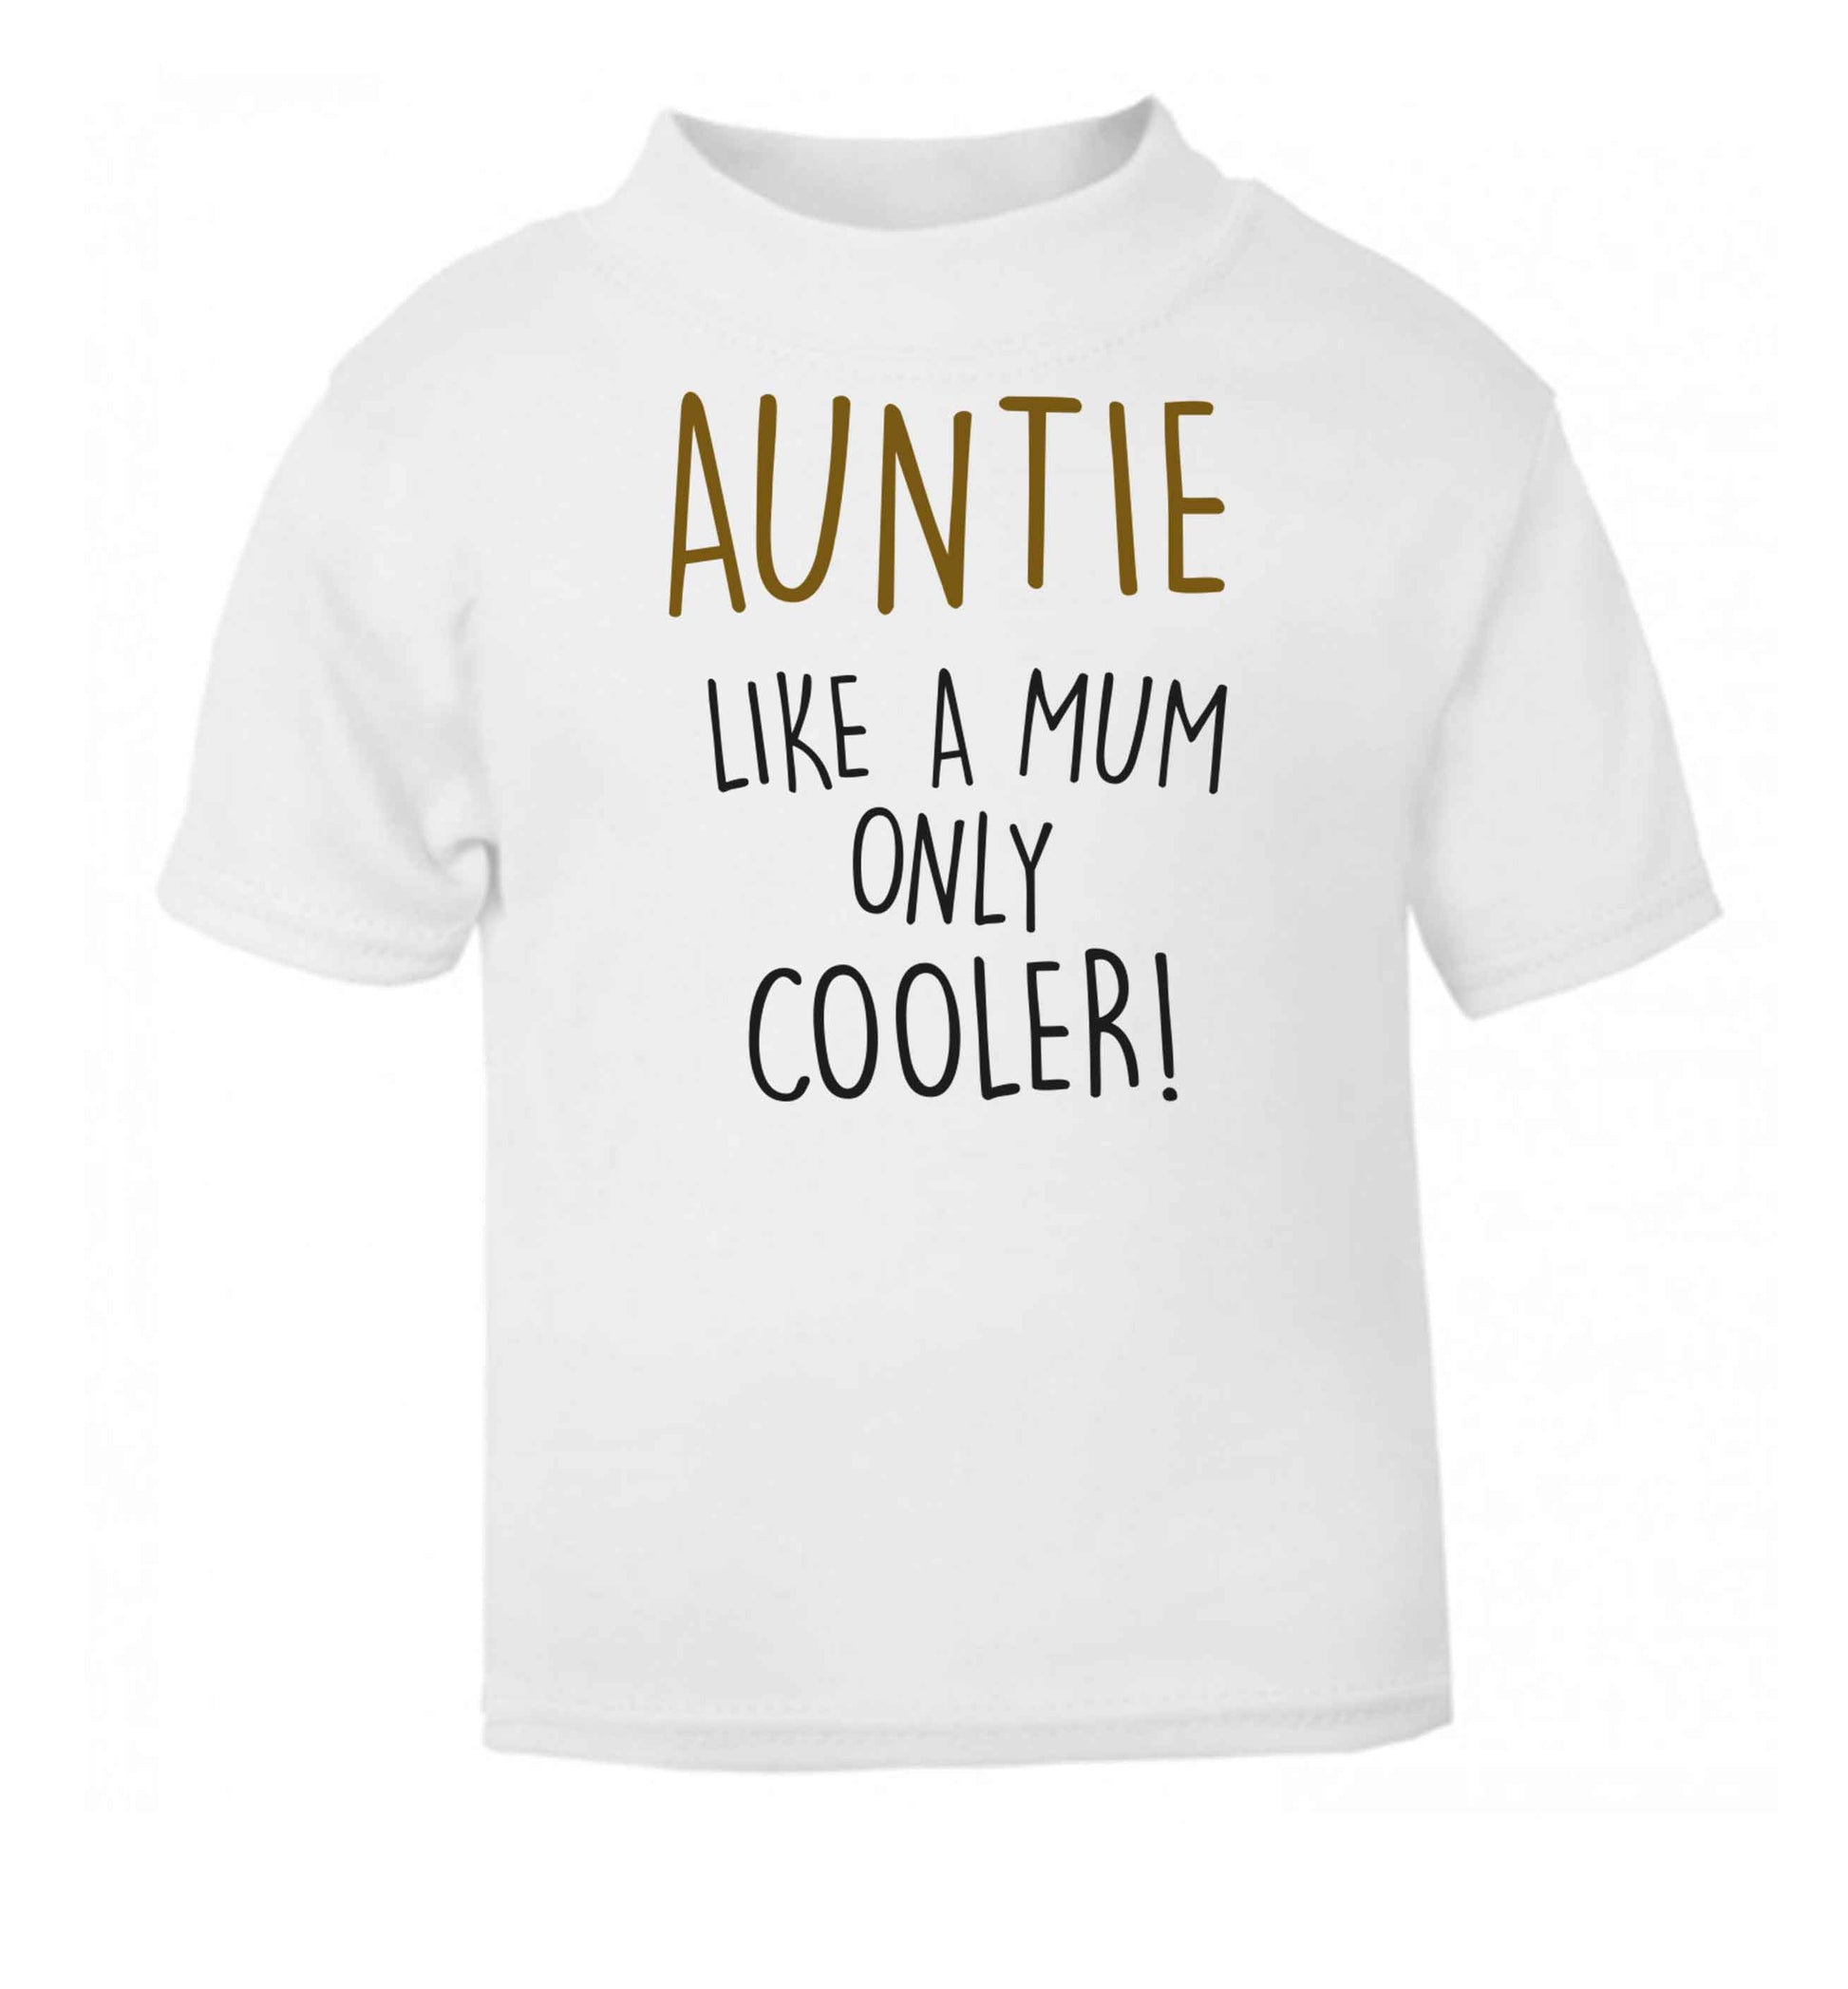 Auntie like a mum only cooler white baby toddler Tshirt 2 Years